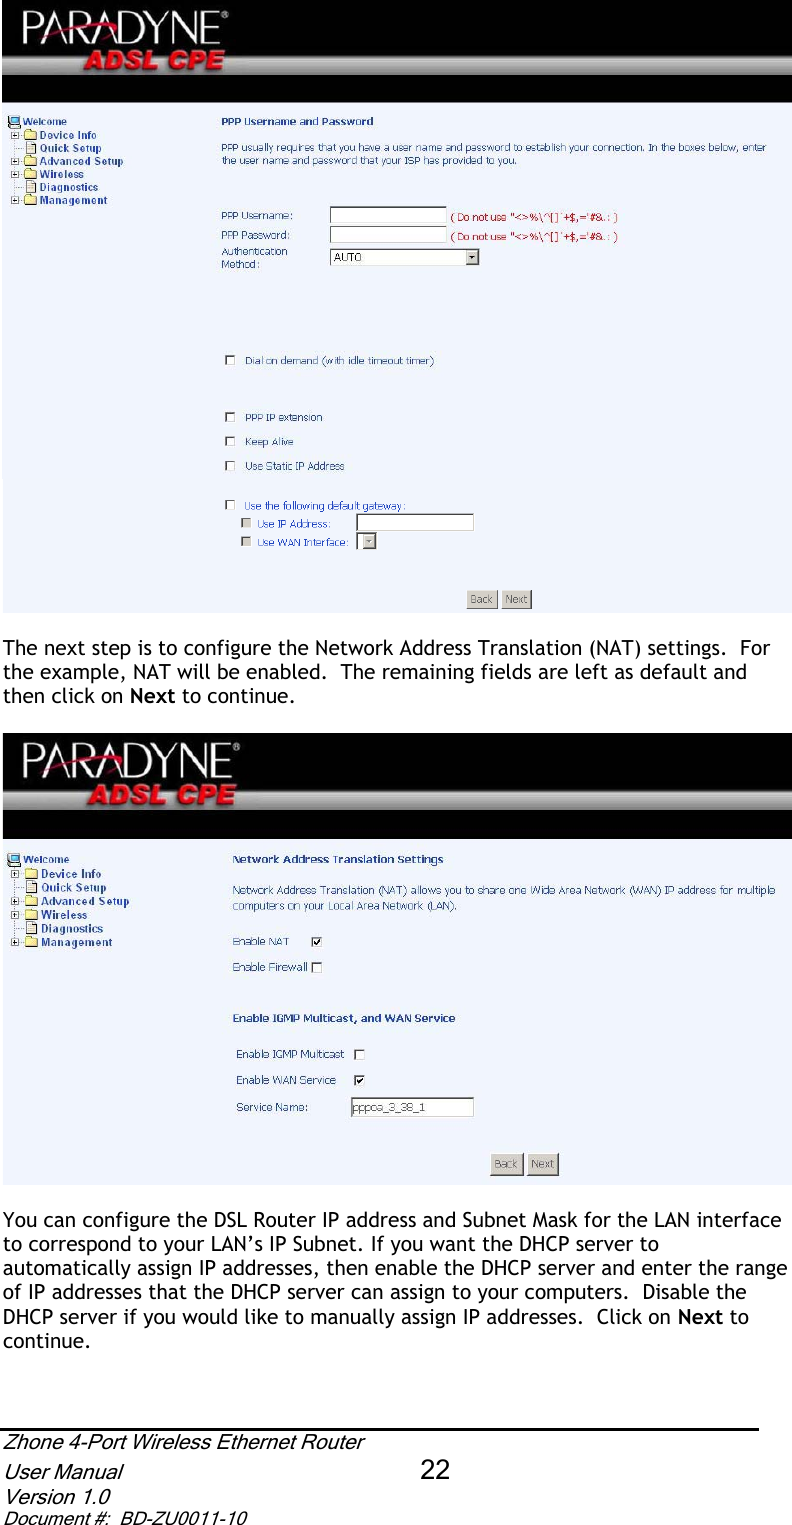 The next step is to configure the Network Address Translation (NAT) settings.  For the example, NAT will be enabled.  The remaining fields are left as default and then click on Next to continue. You can configure the DSL Router IP address and Subnet Mask for the LAN interface to correspond to your LAN’s IP Subnet. If you want the DHCP server to automatically assign IP addresses, then enable the DHCP server and enter the range of IP addresses that the DHCP server can assign to your computers.  Disable the DHCP server if you would like to manually assign IP addresses.  Click on Next tocontinue.Zhone 4-Port Wireless Ethernet Router User Manual 22Version 1.0 Document #:  BD-ZU0011-10